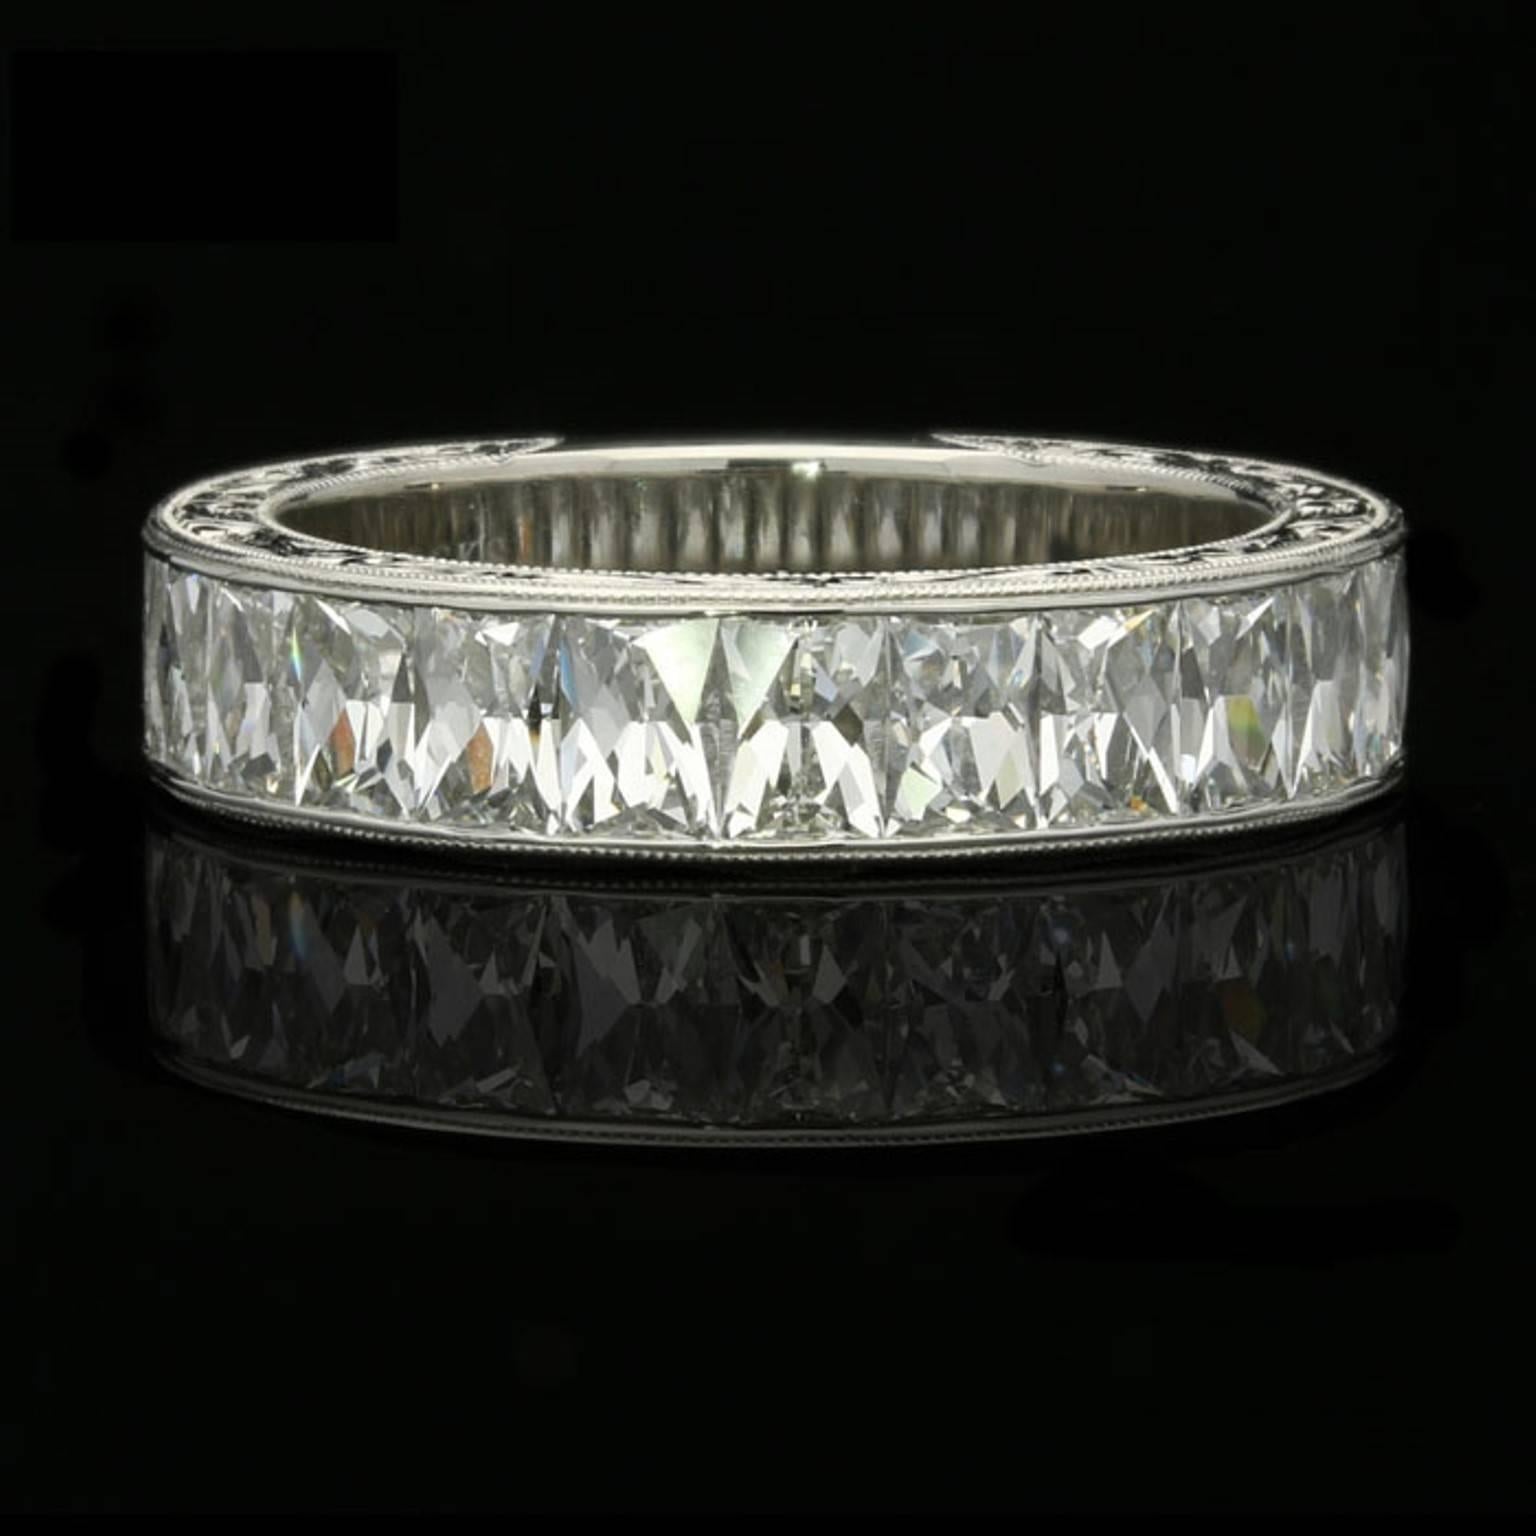 The ring three quarter set with beautiful rectangular French cut diamonds weighing a total of 2.75cts set vertically within a finely crafted and ornately hand engraved channel set platinum mount.

15 rectangular French cut diamonds with a combined